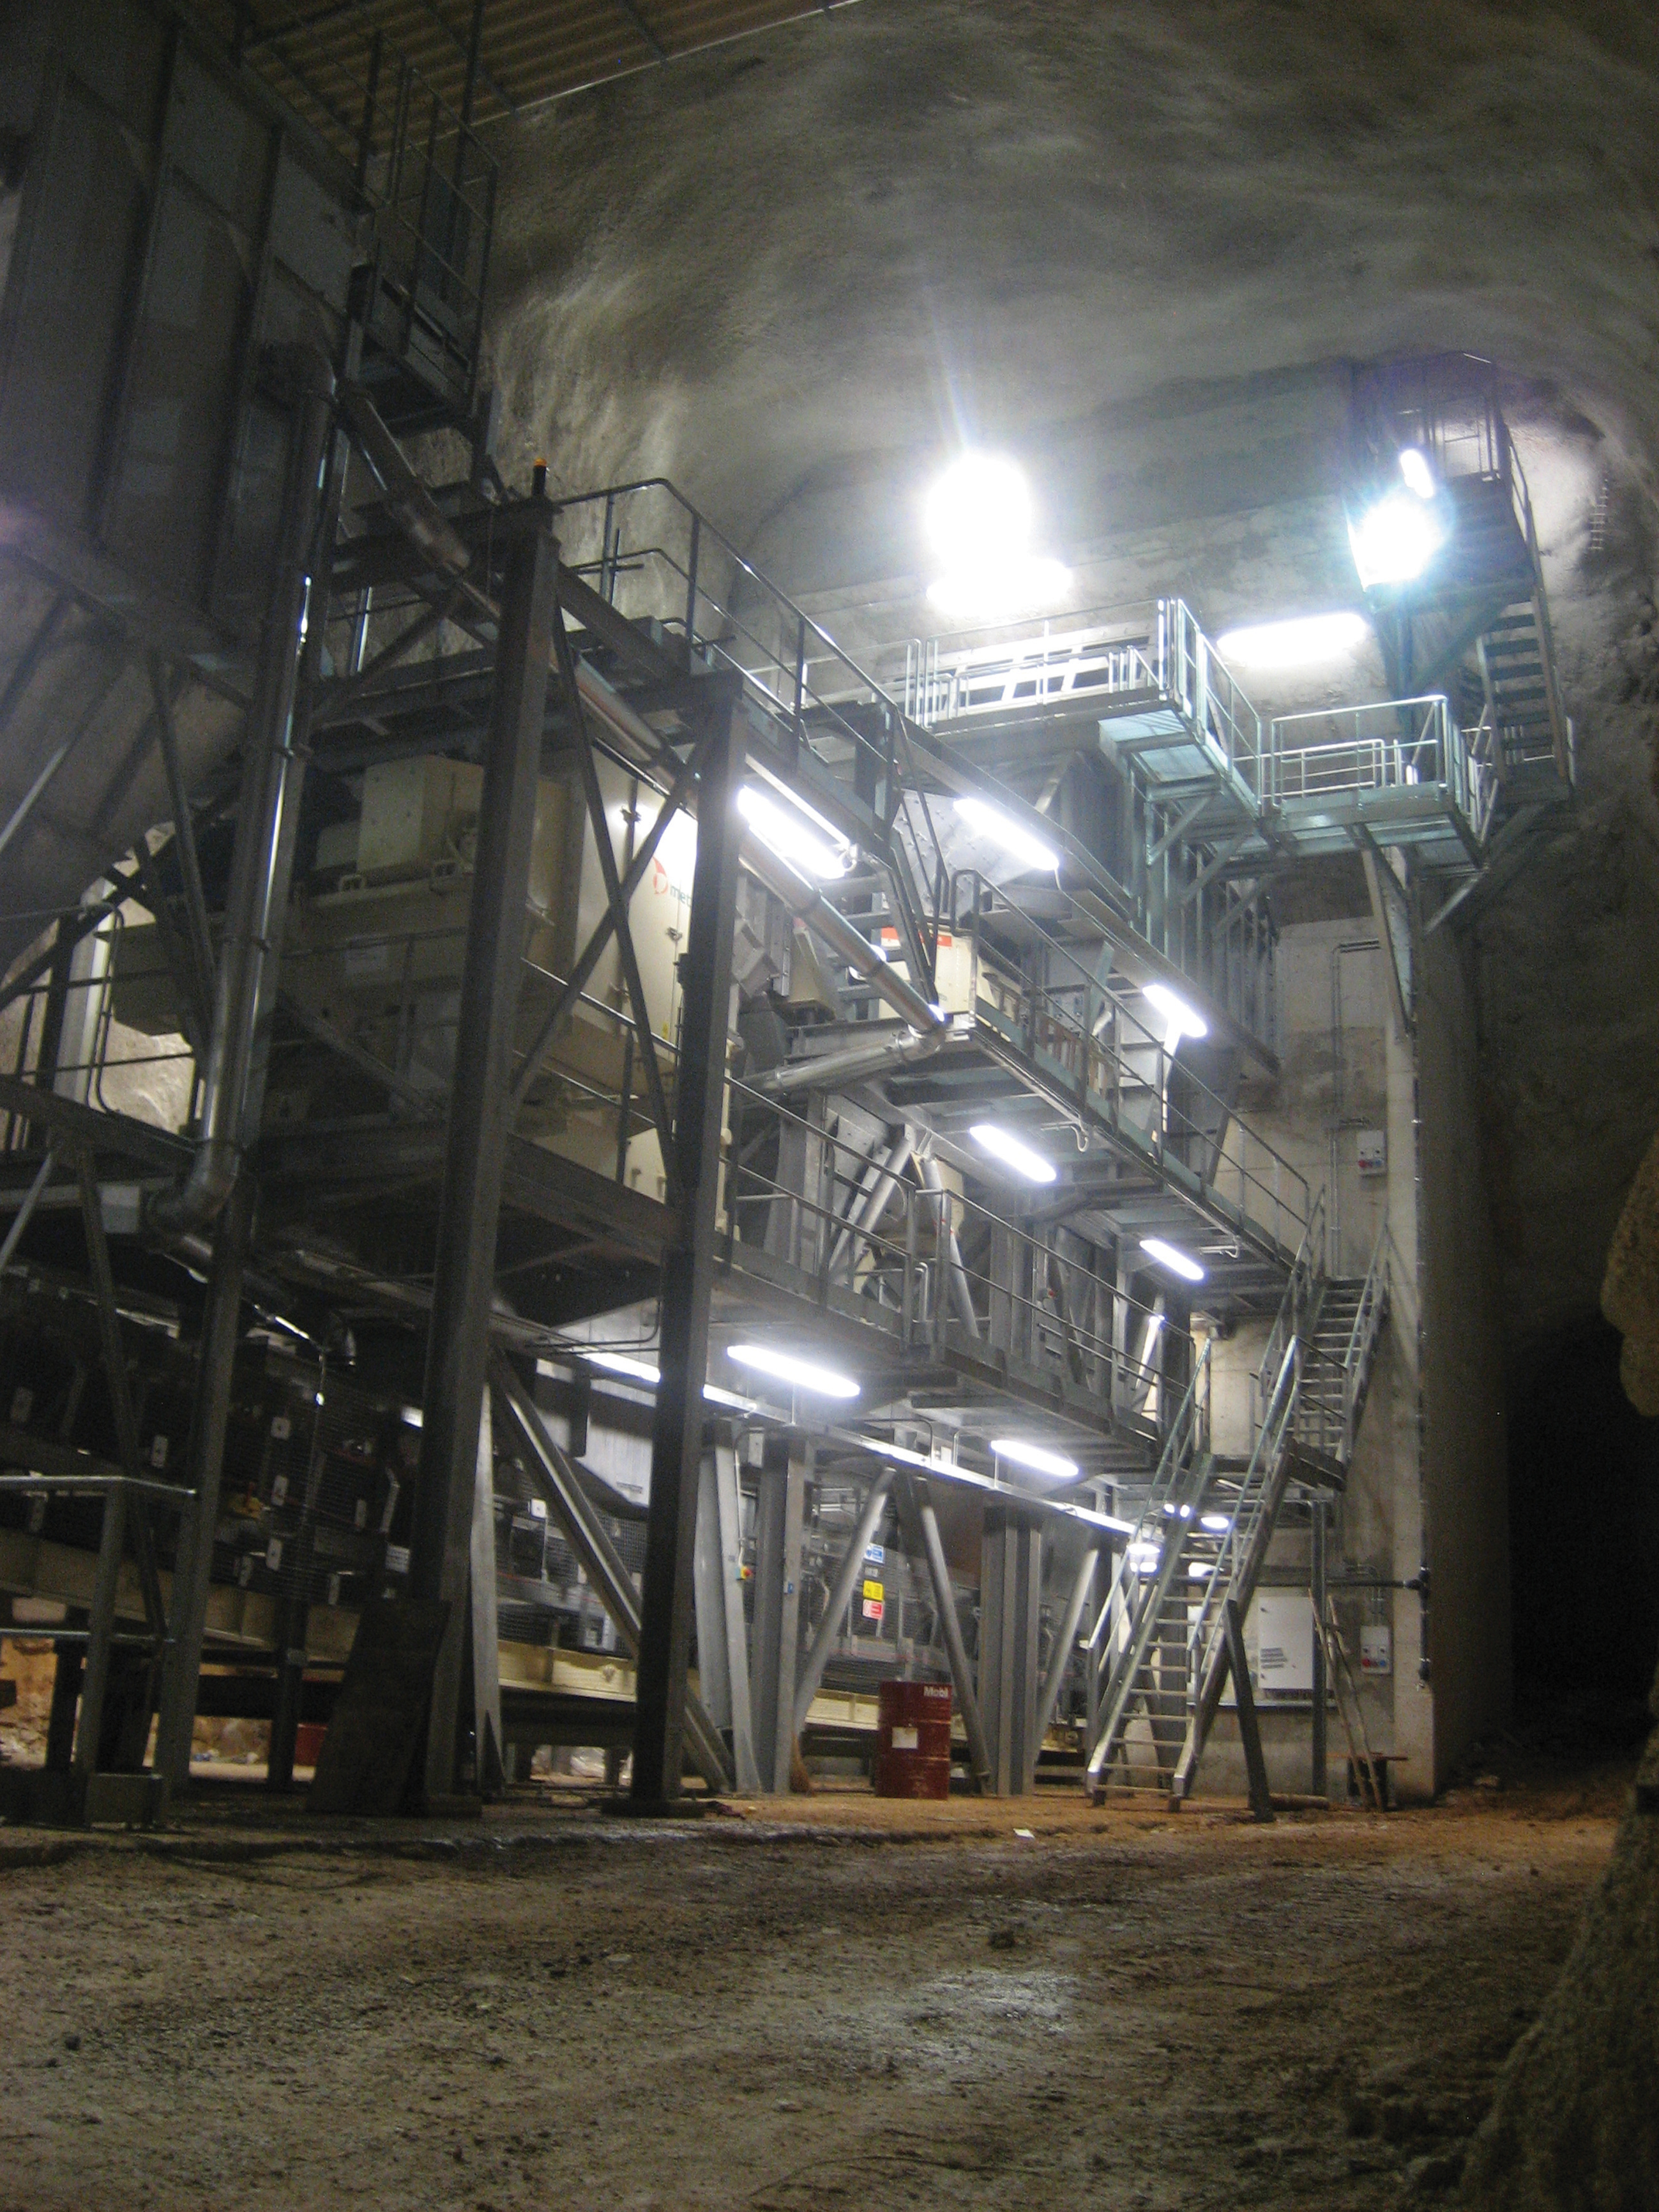 The primary crushing plant, housed in a specially-built cavern